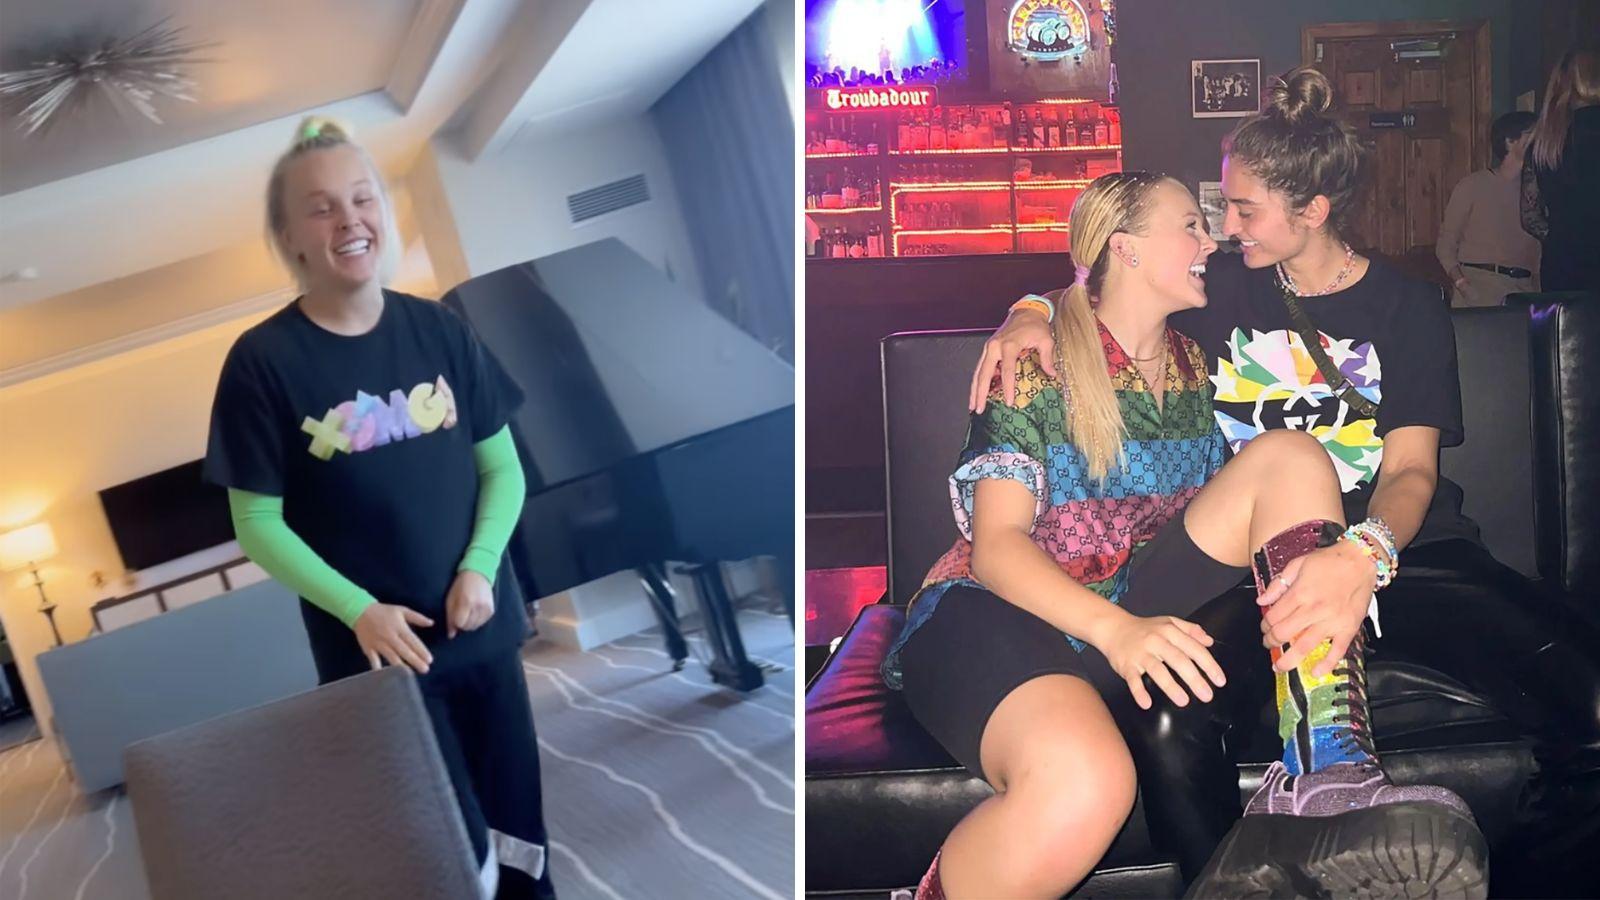 JoJo Siwa claims ex Avery Cyrus used her for "clout" and "views"